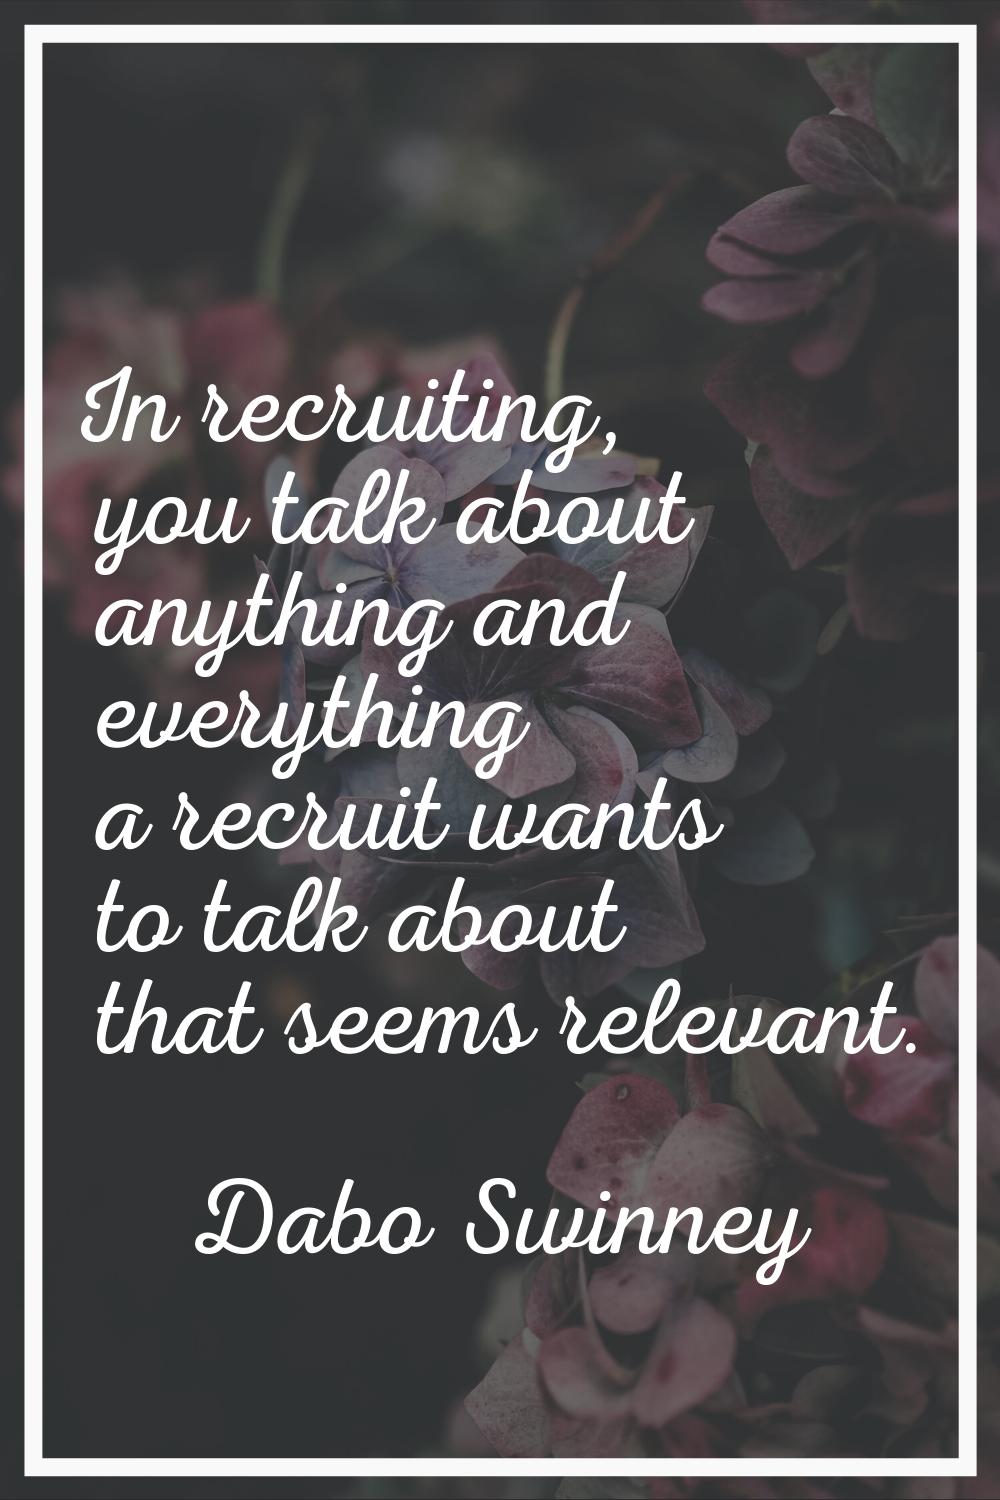 In recruiting, you talk about anything and everything a recruit wants to talk about that seems rele